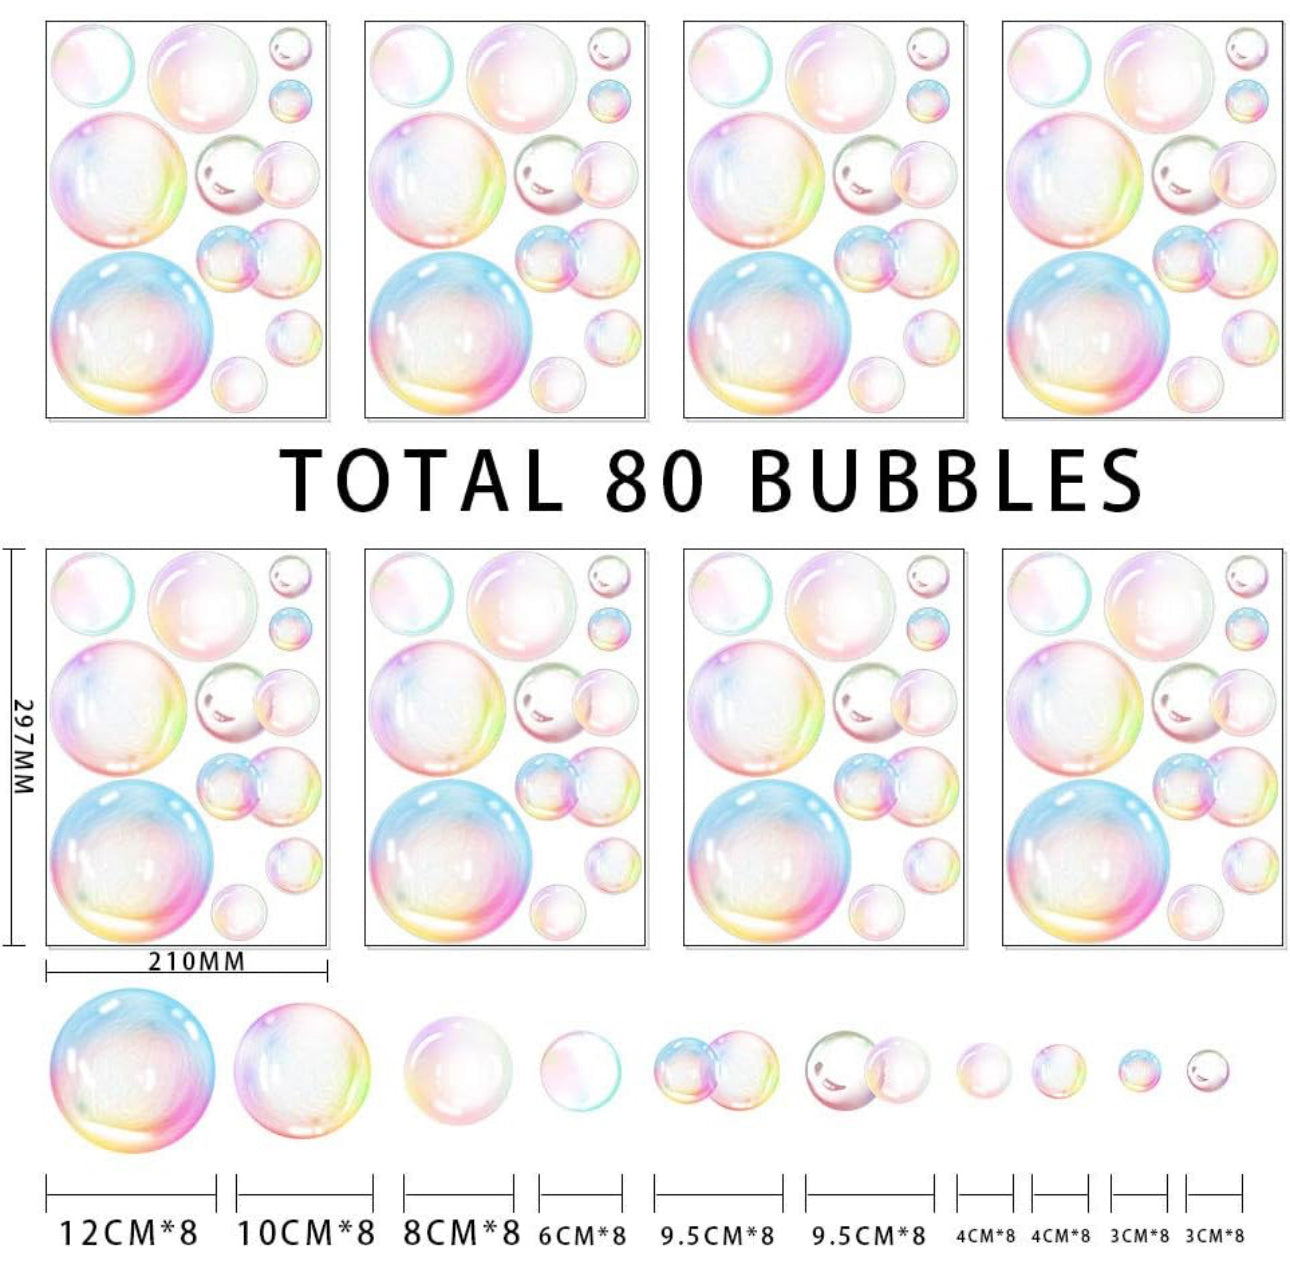 Transparent Bubble Wall Decal Sticker Cutout Kid's Under The Sea Birthday Party Decoration Blue White Colour Bubble Ocean Background Decor Water Soap Bath Decor for Mermaid Baby Shower (Color)